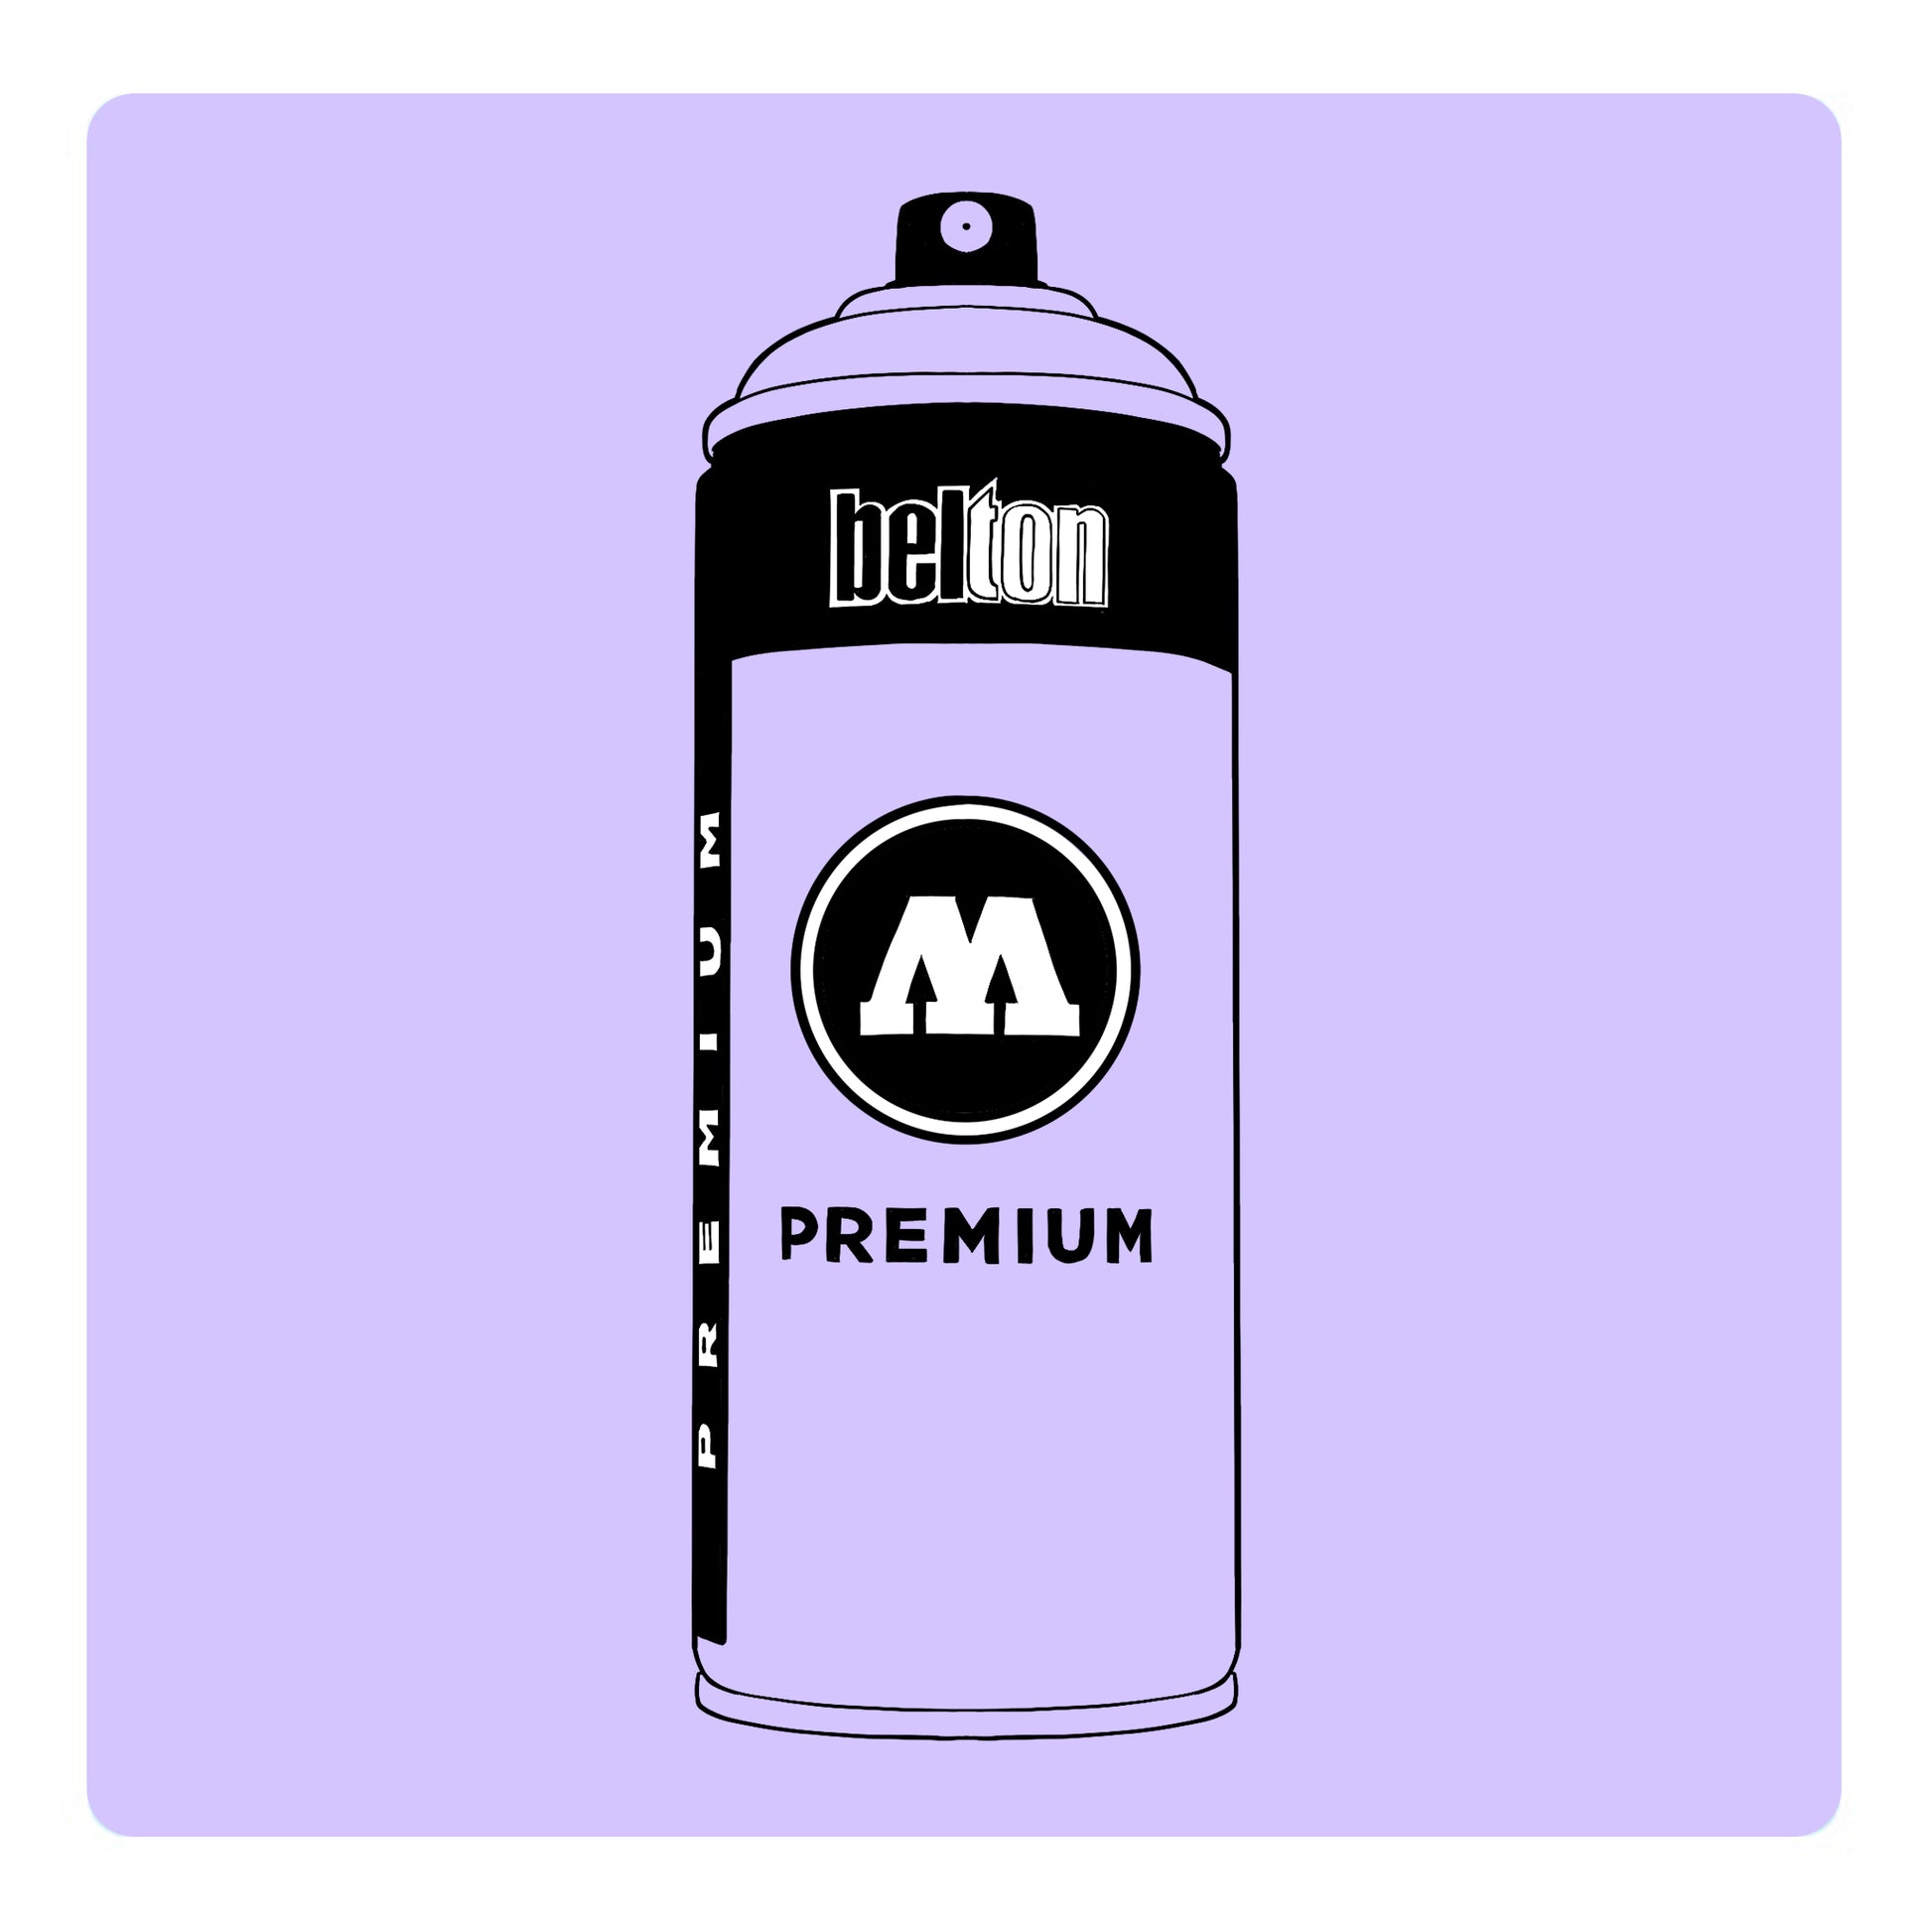 A black outline drawing of a light pastel purple spray paint can with the words "belton","premium" and the letter"M" written on the face in black and white font. The background is a color swatch of the same light pastel purple with a white border.